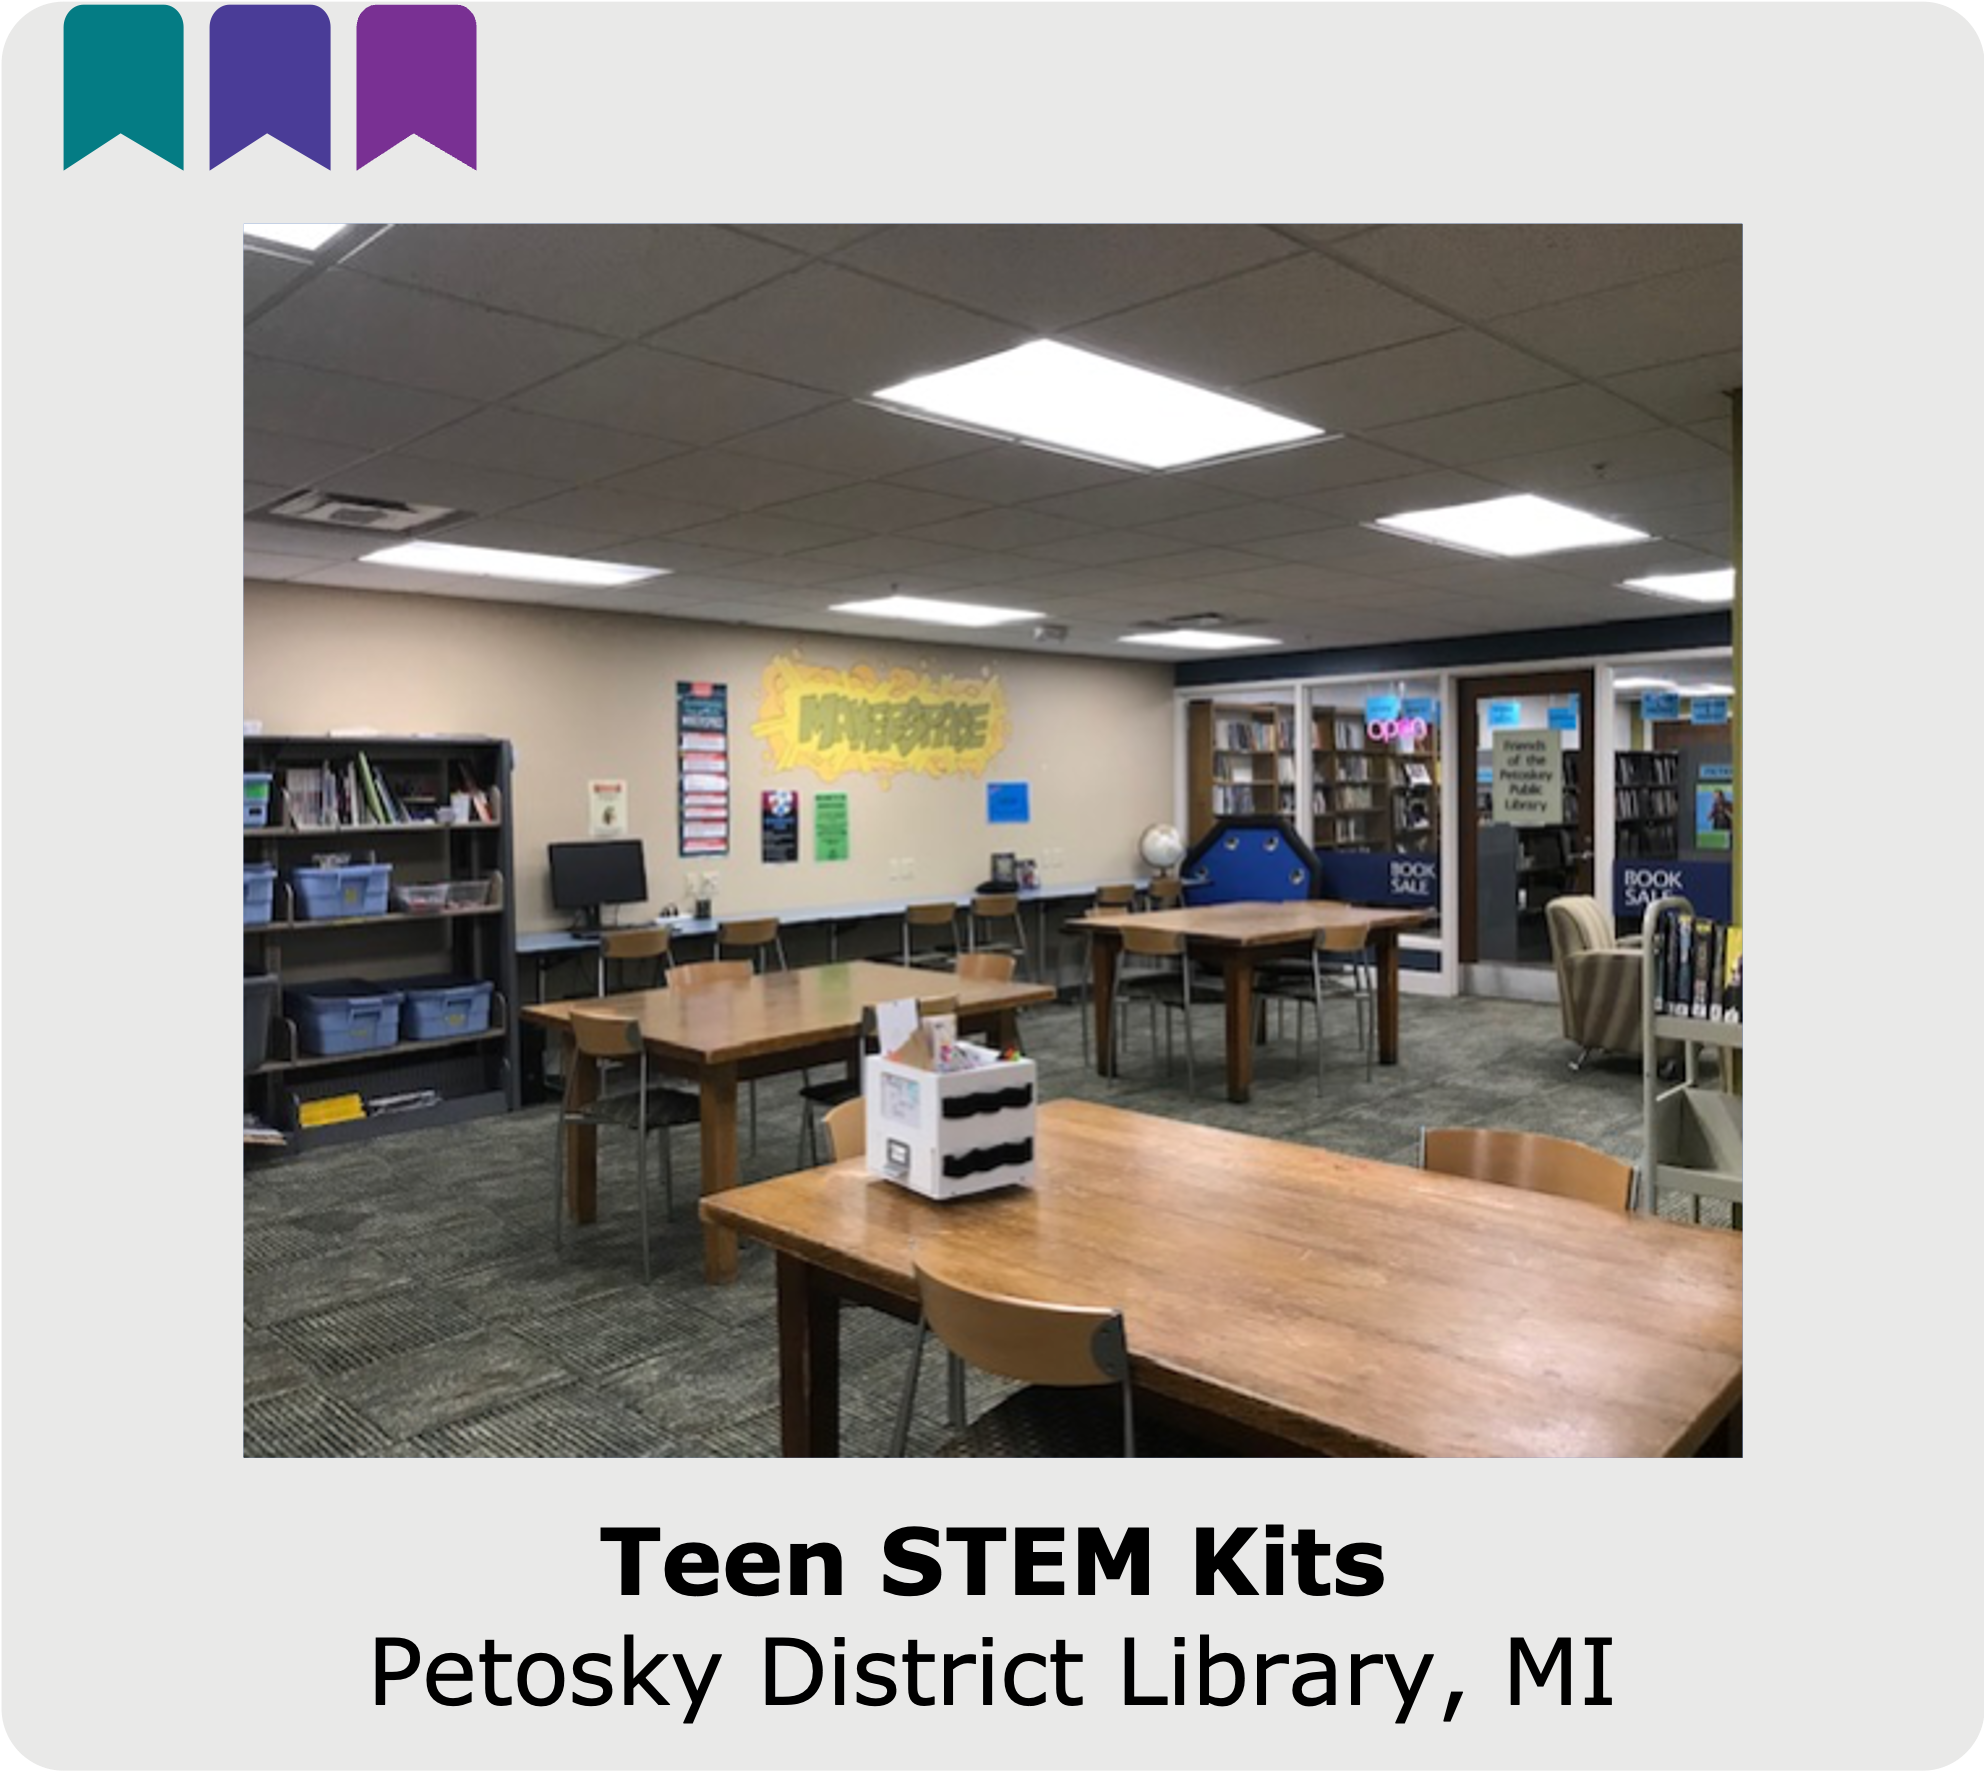 Click to open the case study of the teen STEM kits program at Petoskey District Library in Michigan.